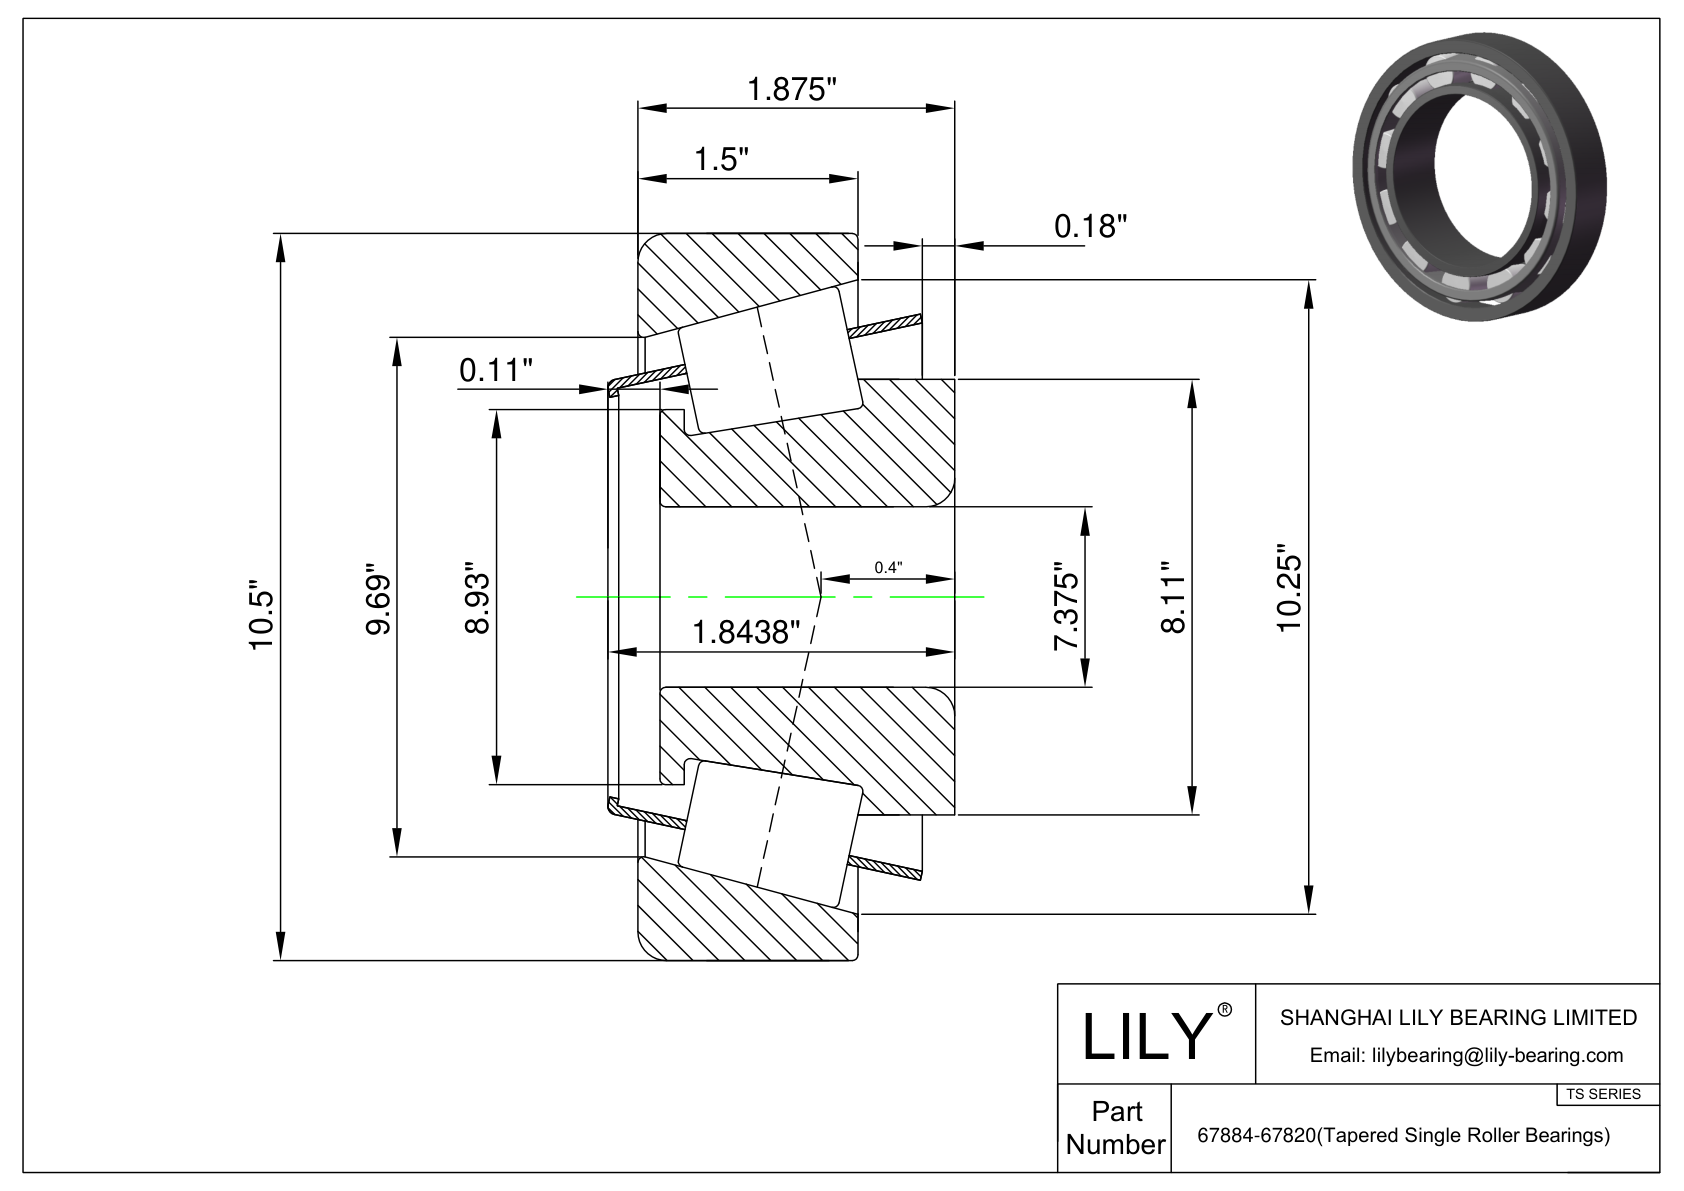 67884-67820 TS (Tapered Single Roller Bearings) (Imperial) cad drawing